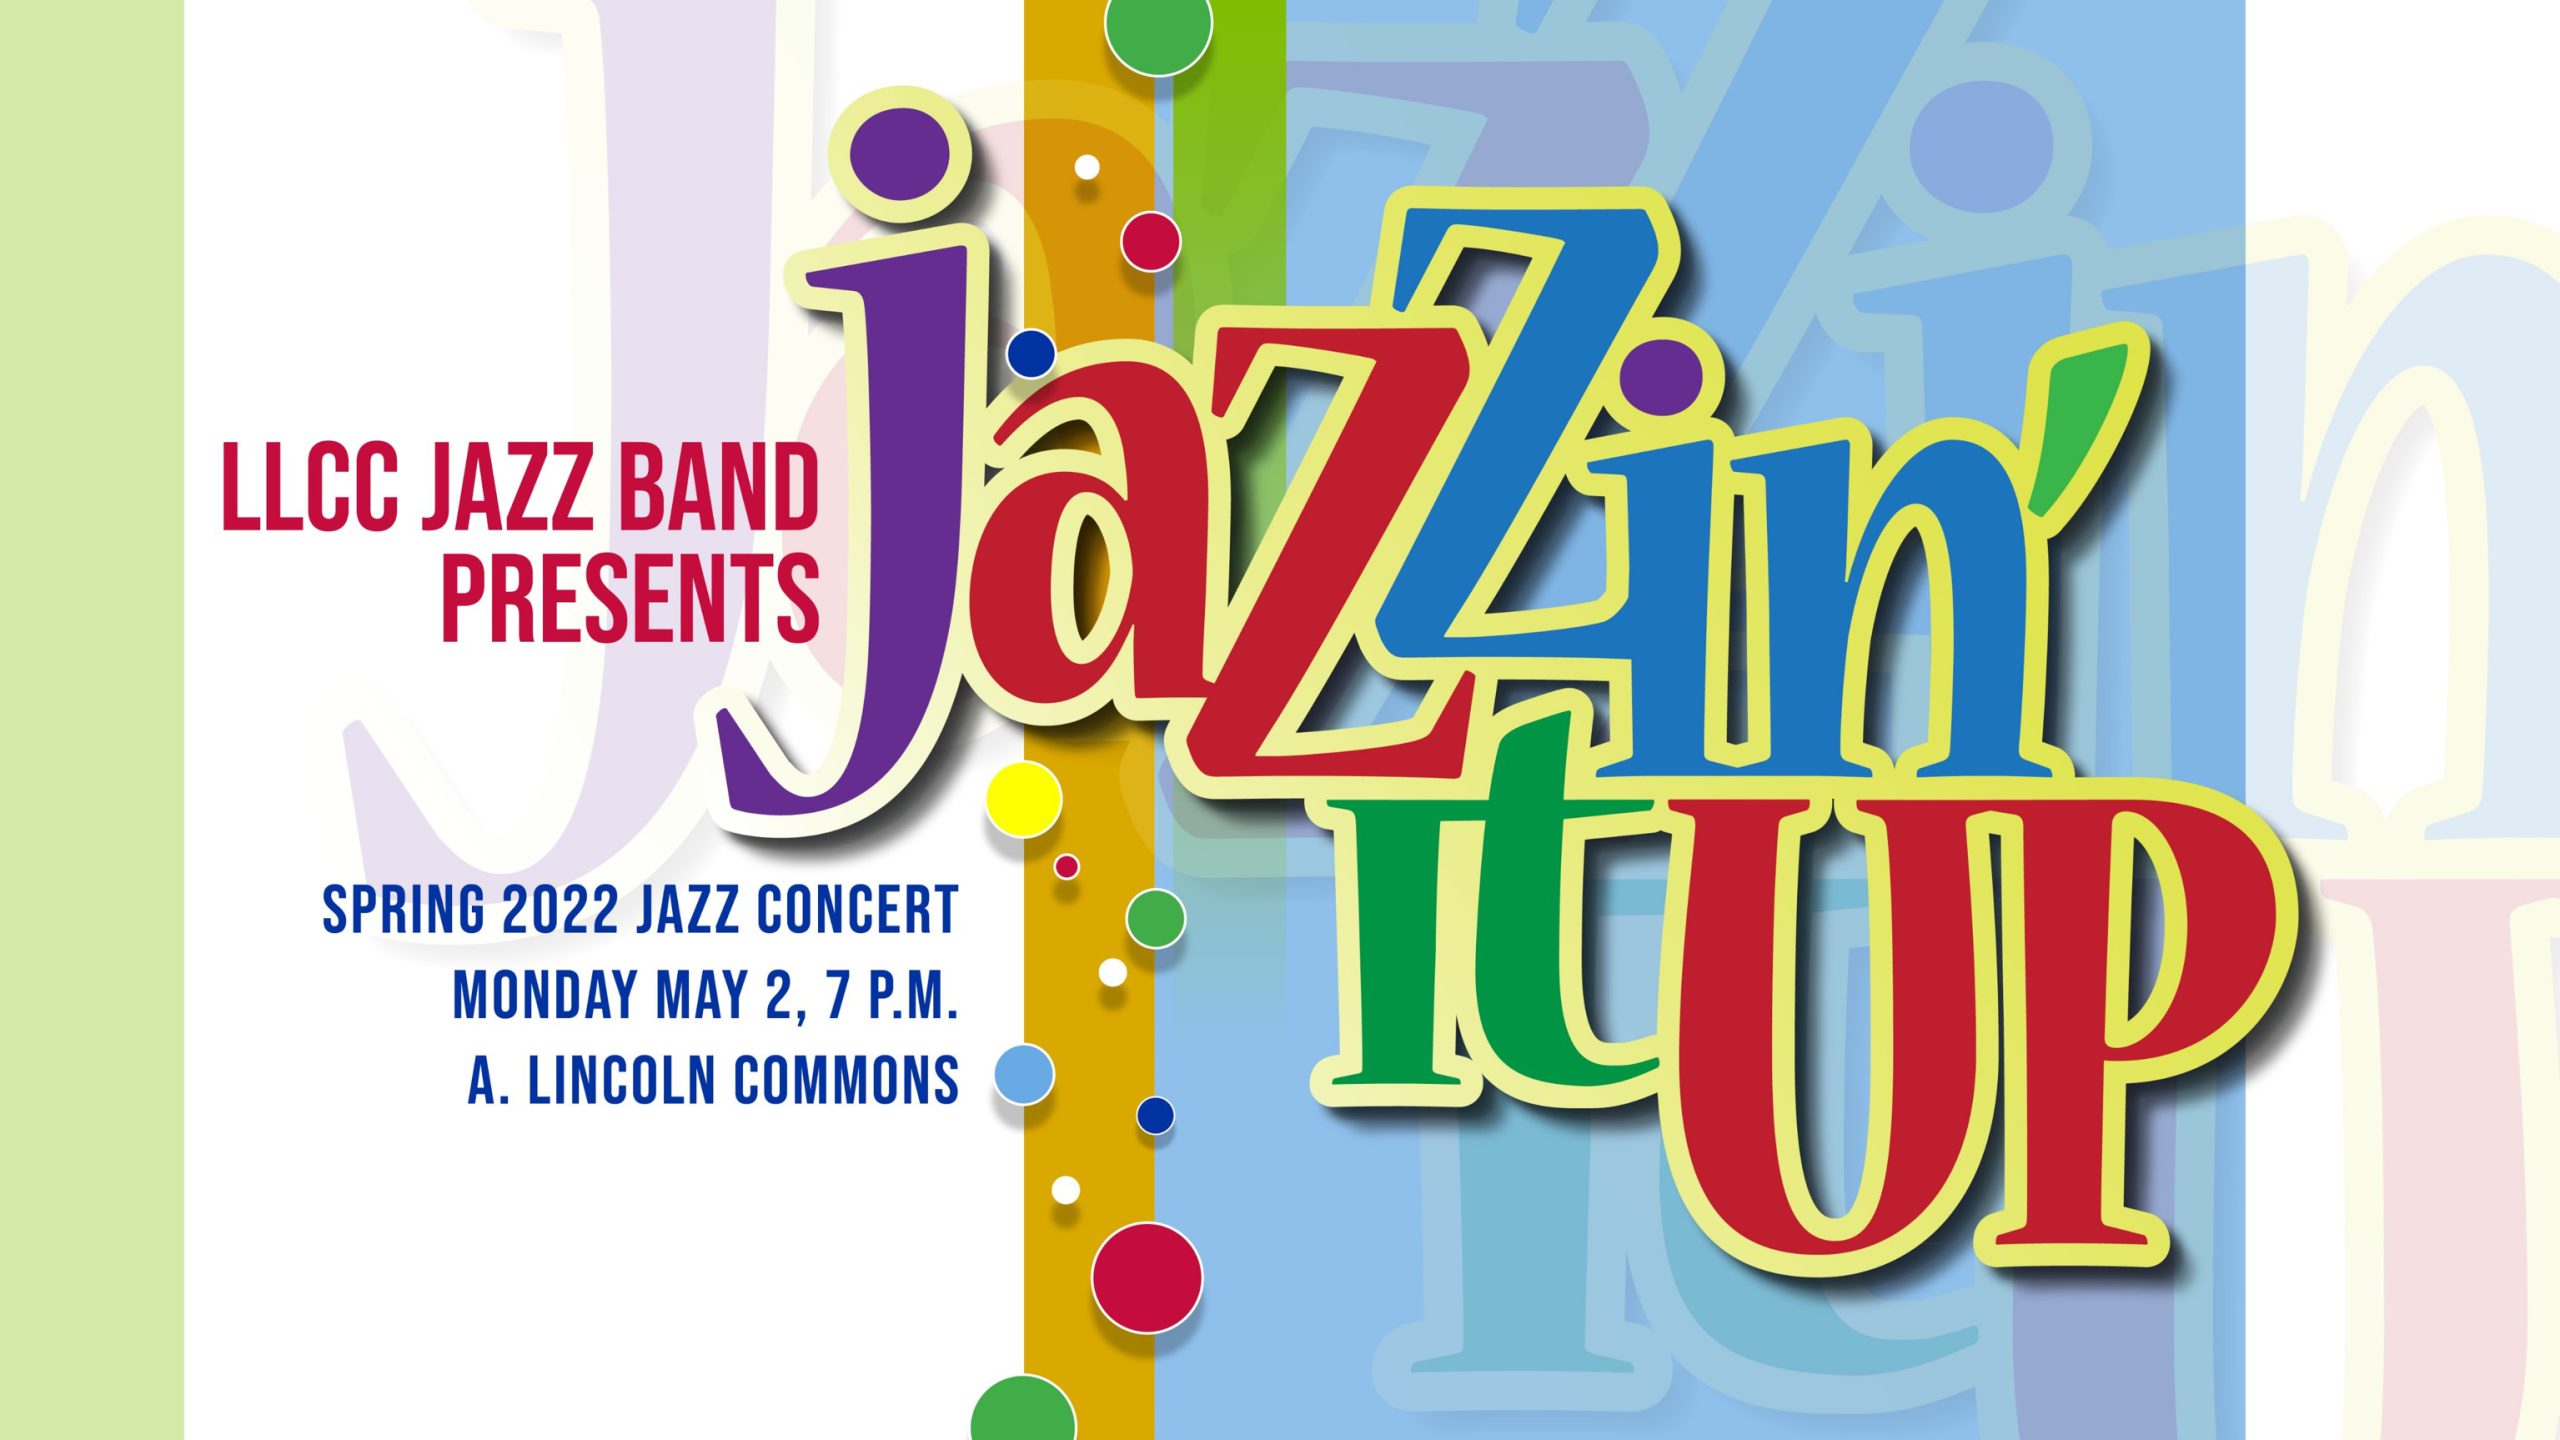 LLCC Jazz Band presents Jazzin' It Up, spring 2022 jazz concert, Monday, May 2, 7 p.m., A. Lincoln Commons